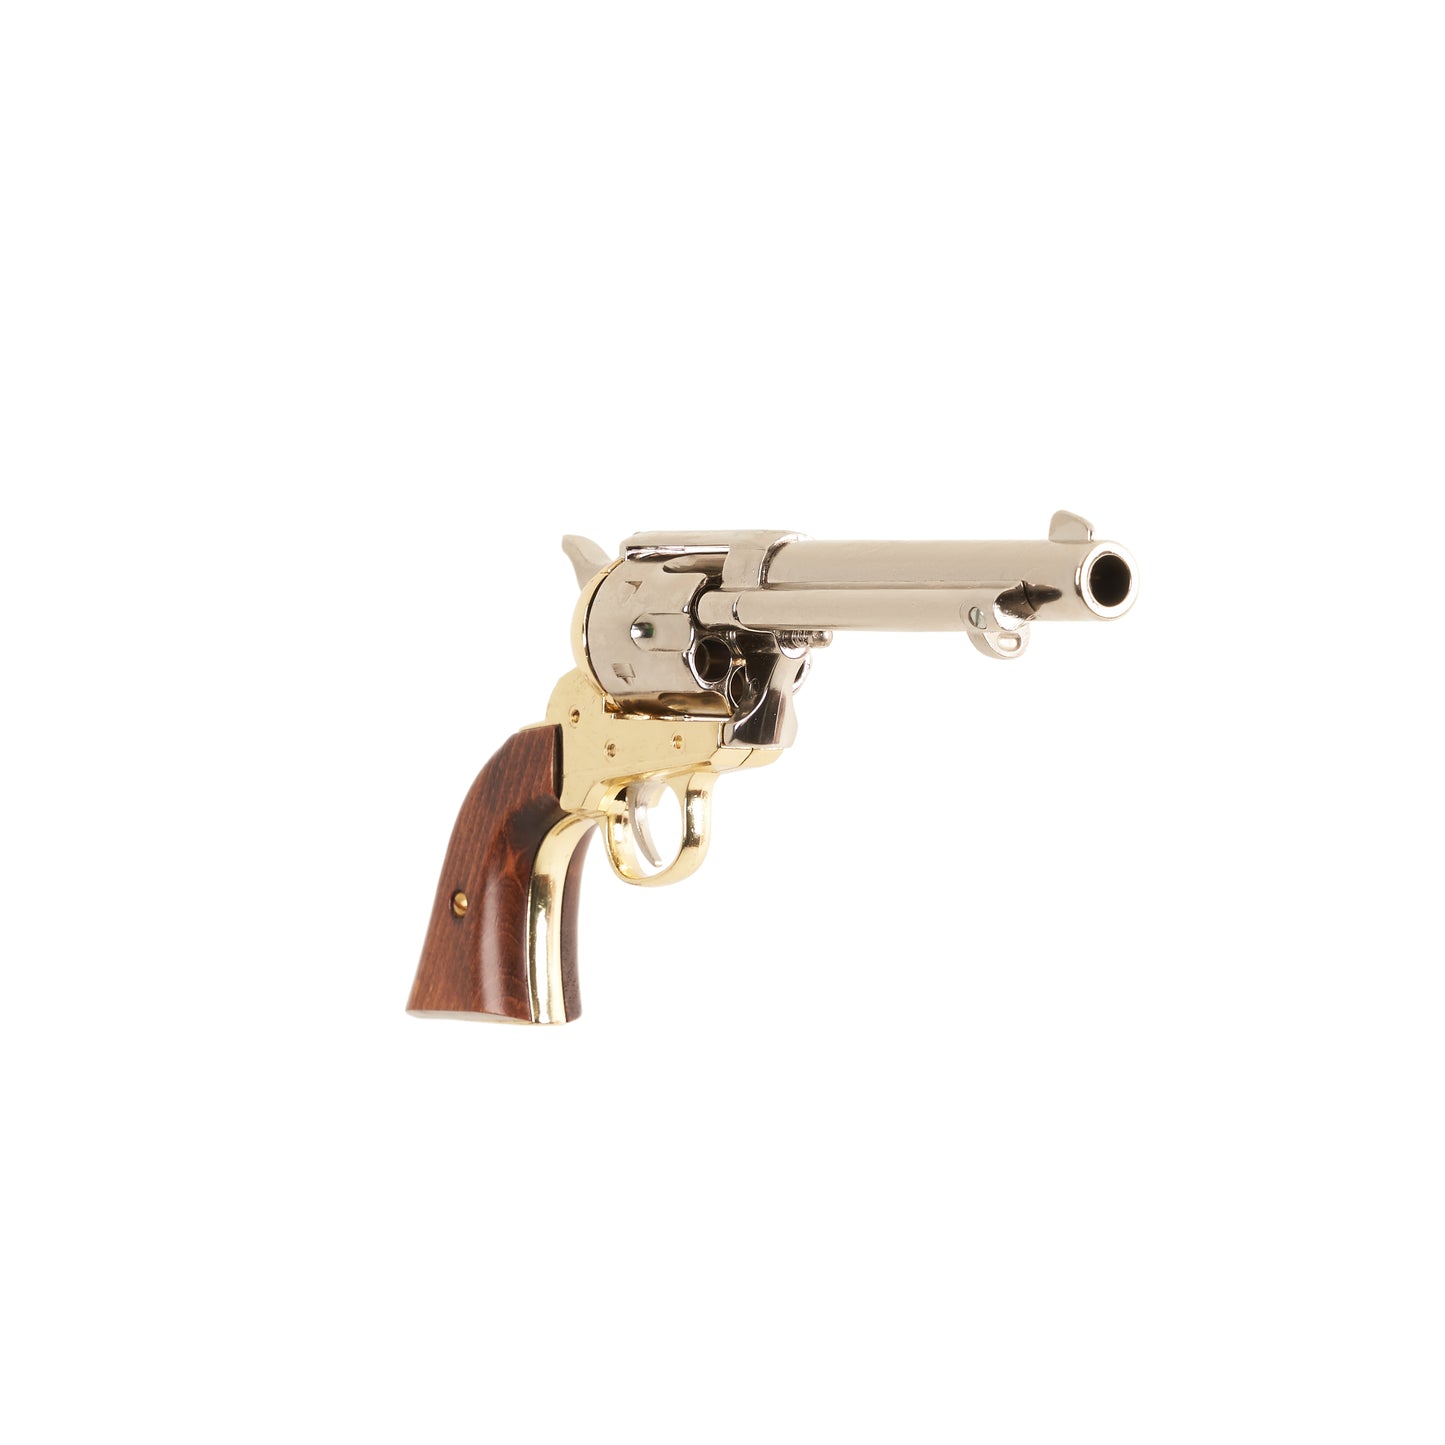 Front view of polished nickel Non-Firing 1873 Peacemaker single action Revovler with brass trigger guard and wood grip.